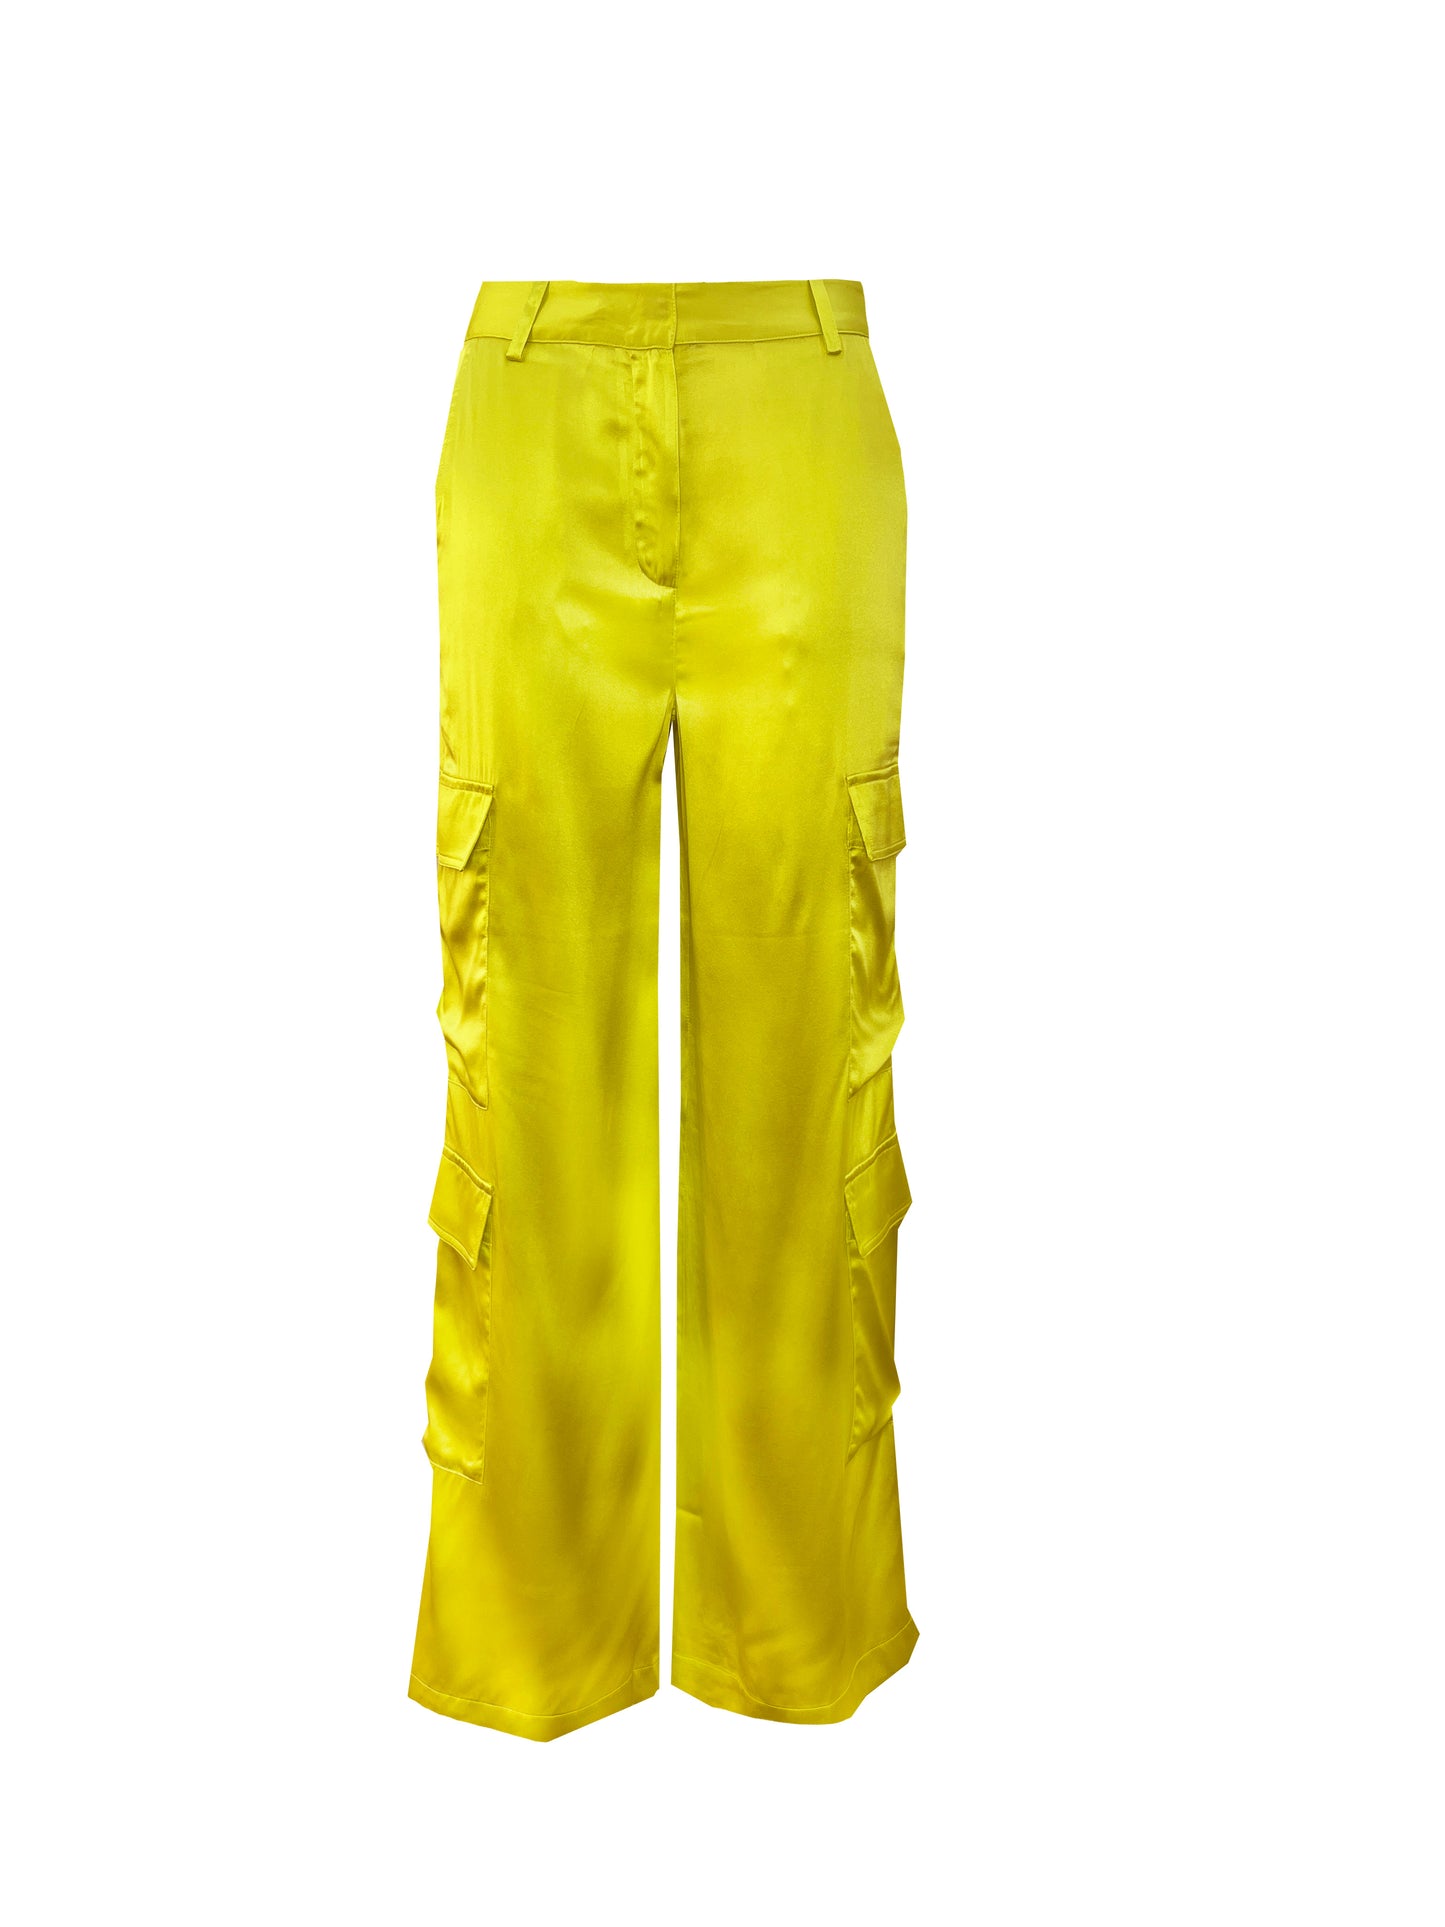 The Cargo Trousers in Lime green